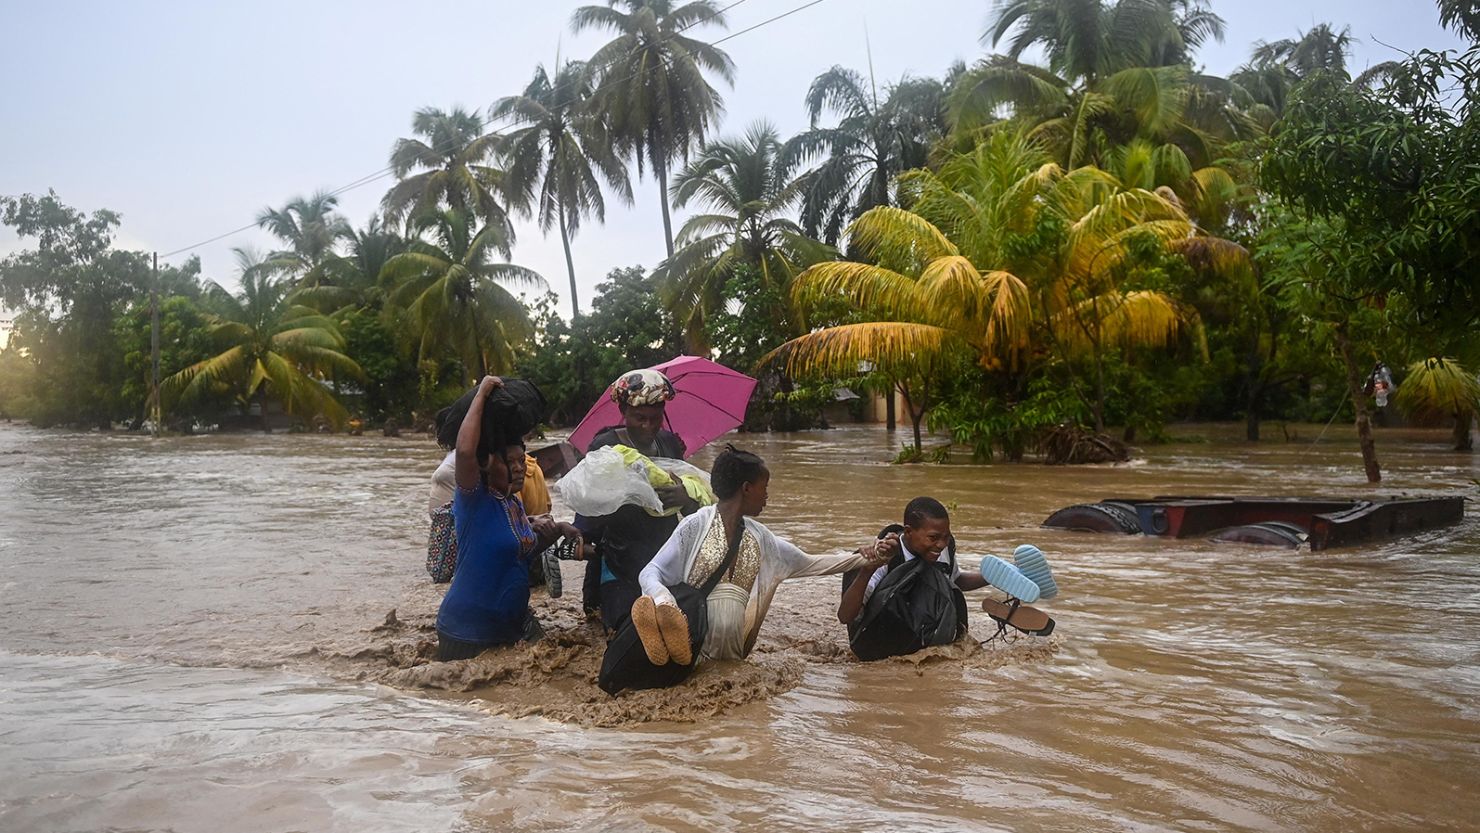 Residents cross the submerged Route Nationale 2, 37 km west of Port-au-Prince, Haiti.